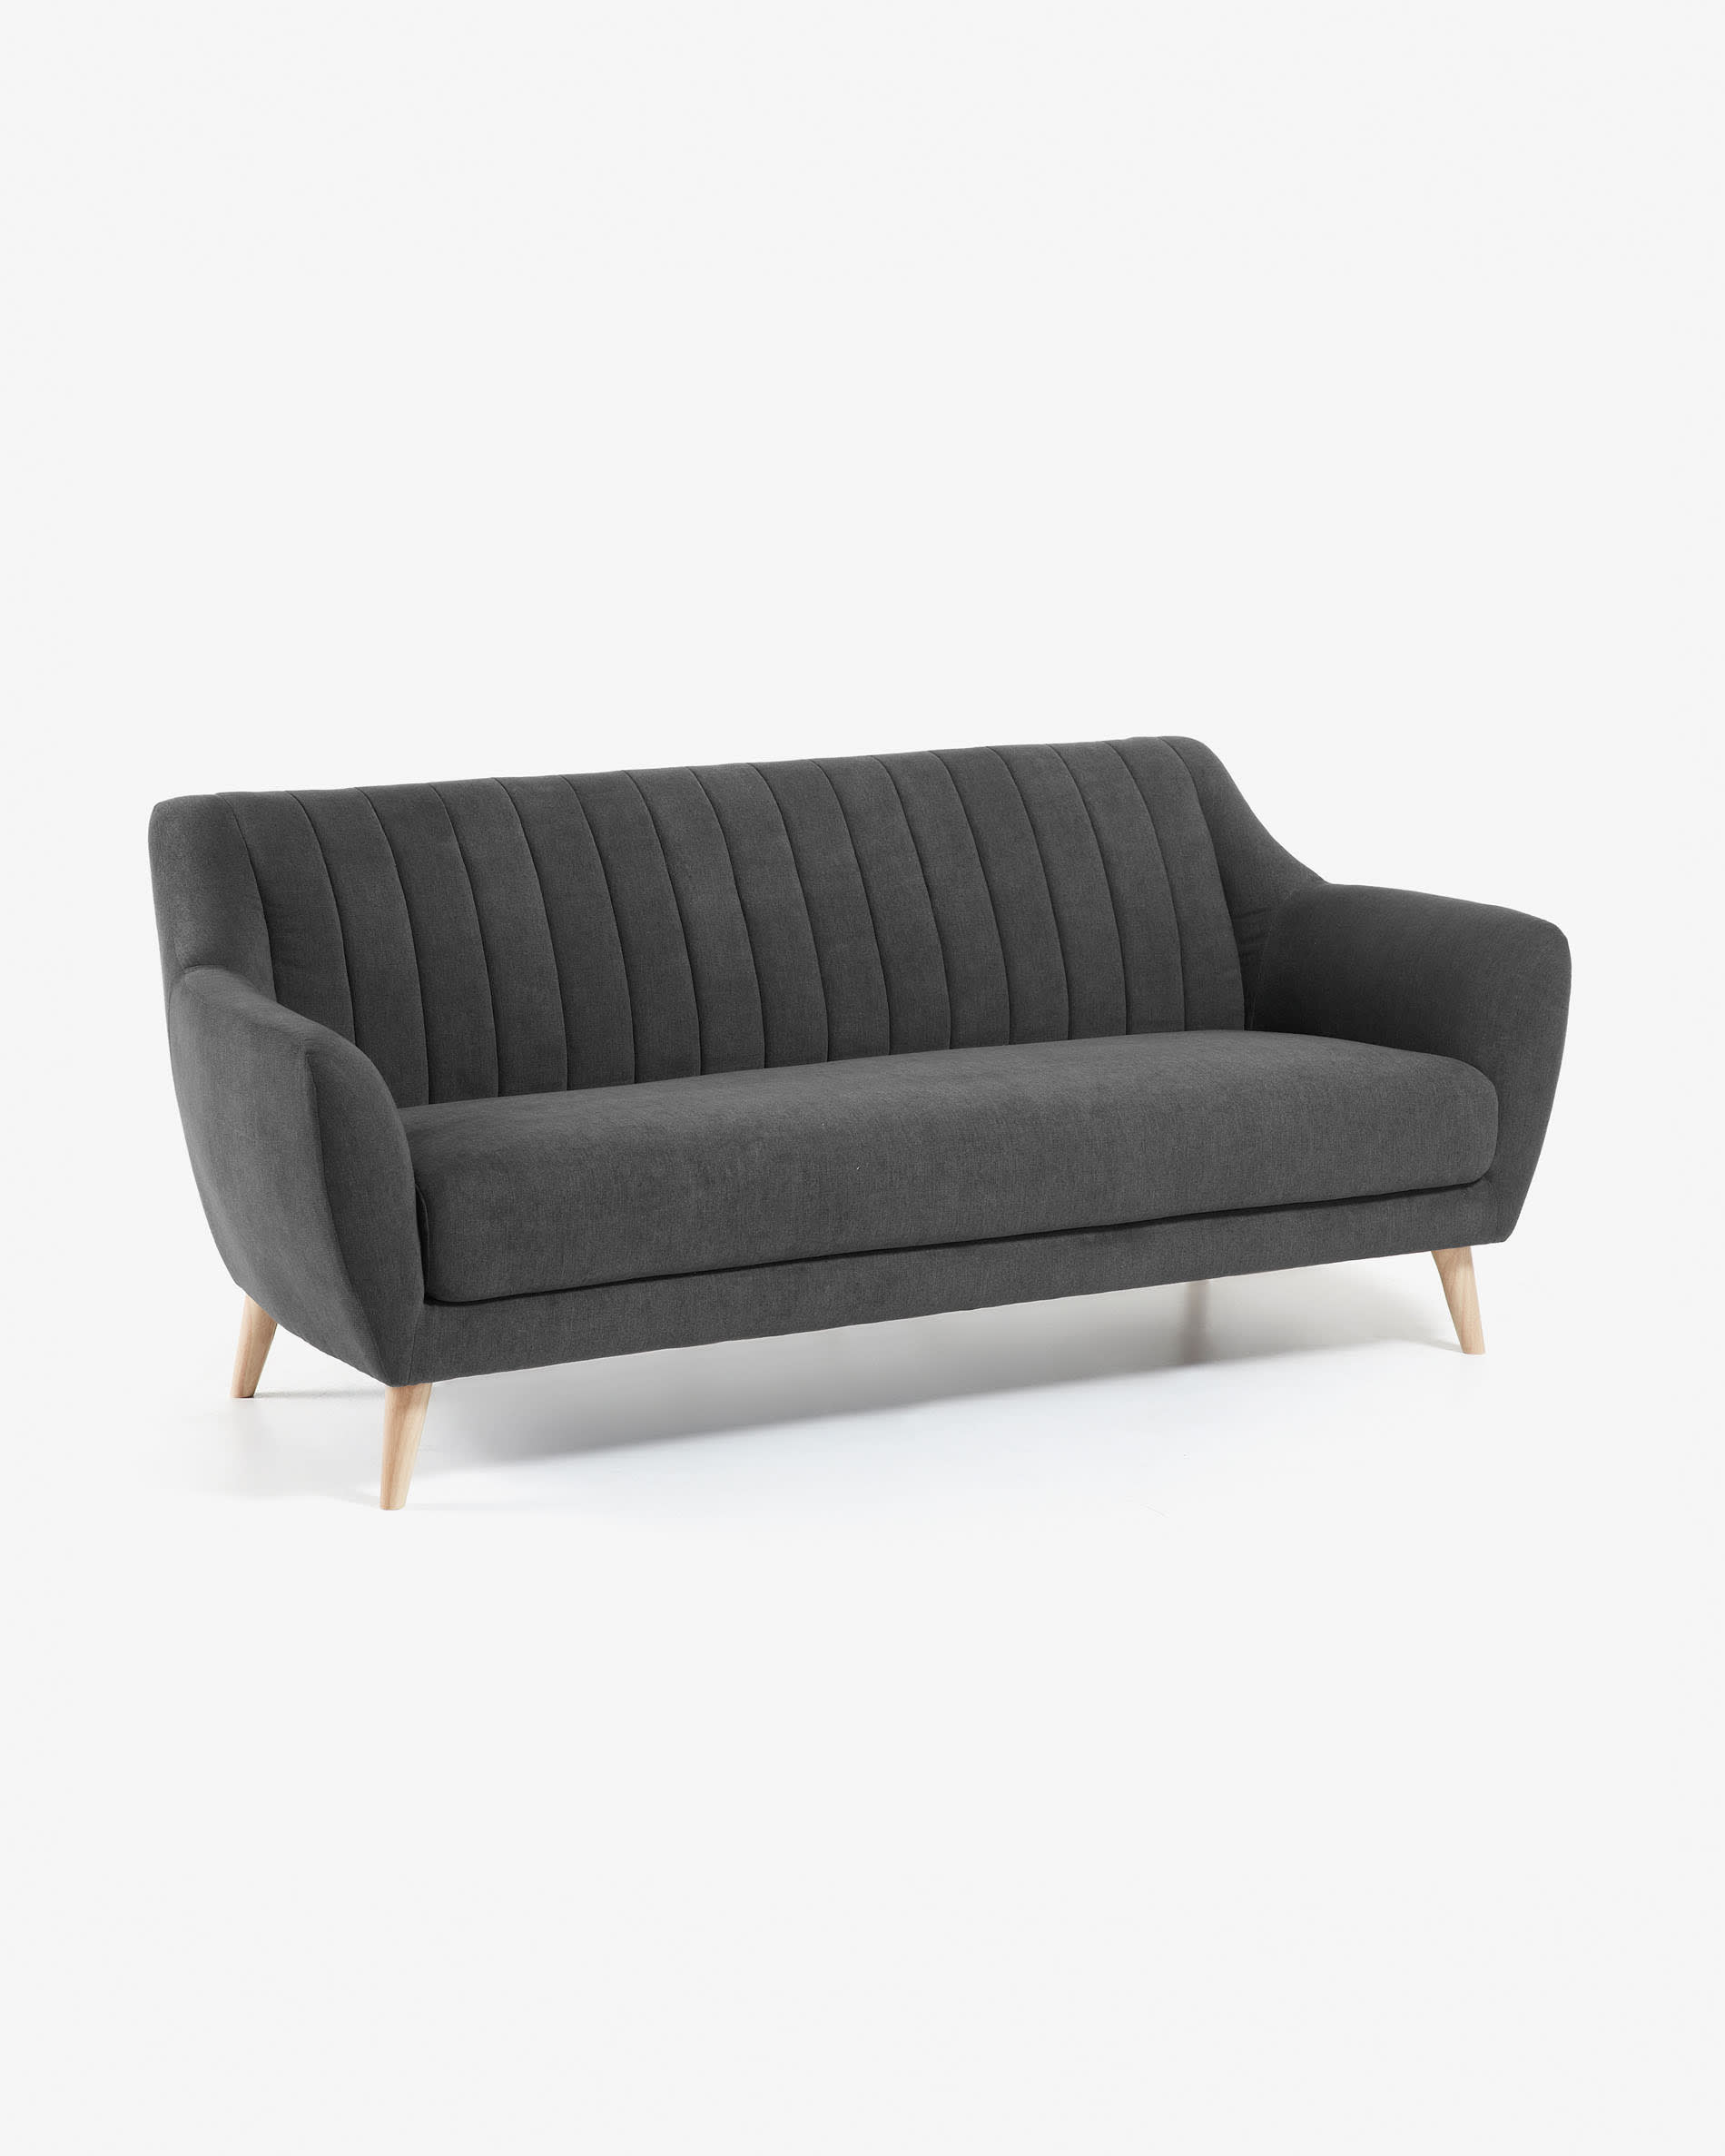 Obo 3 seater sofa in dark grey with solid oak wood legs 190 cm | Kave Home